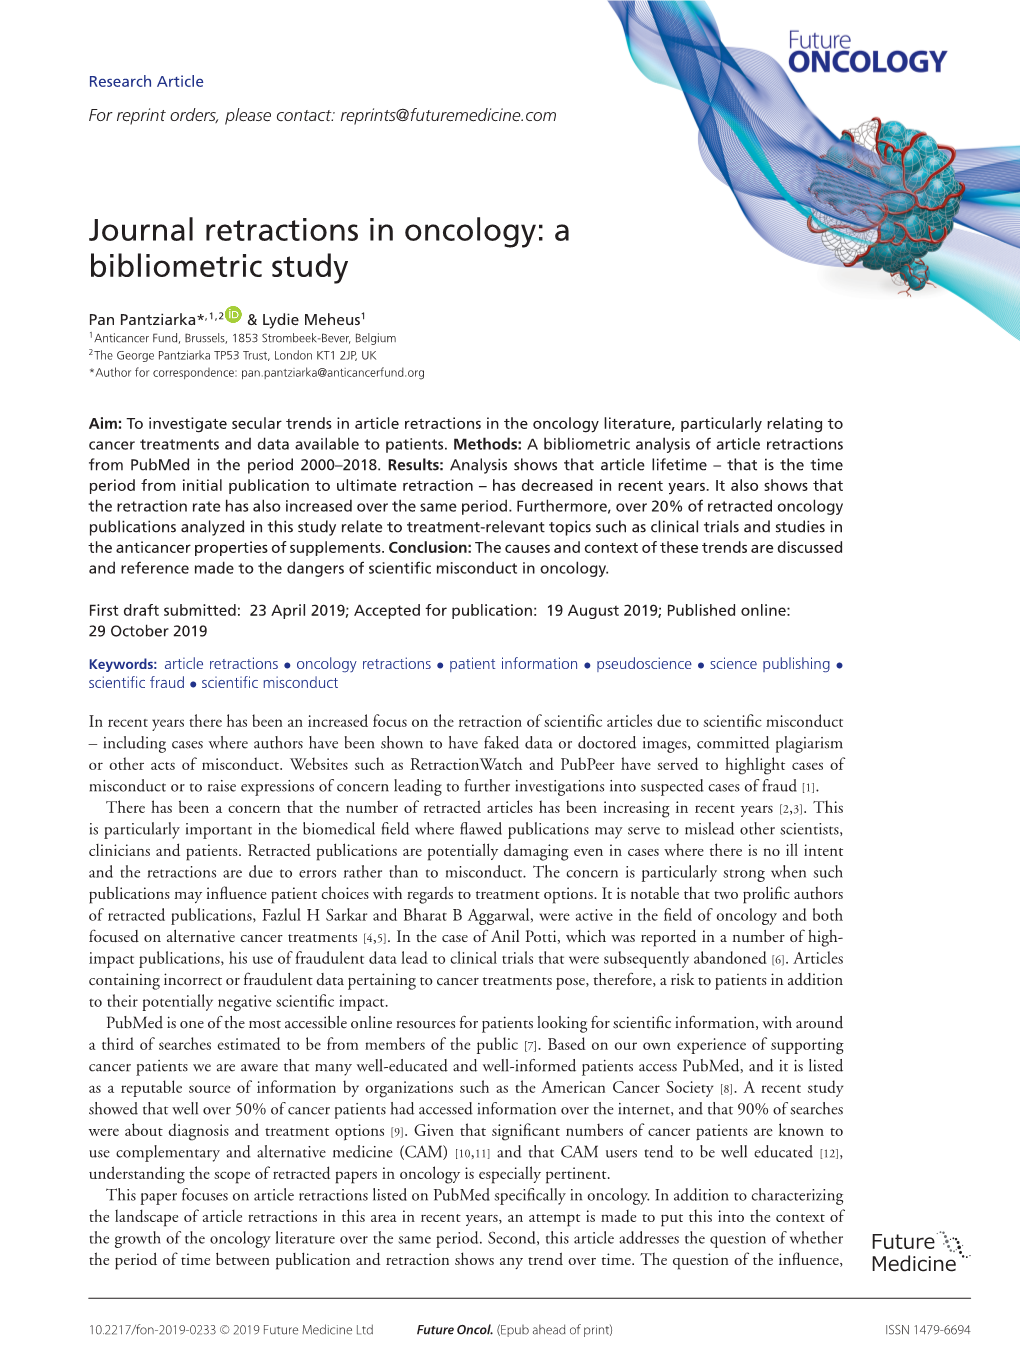 Journal Retractions in Oncology: a Bibliometric Study